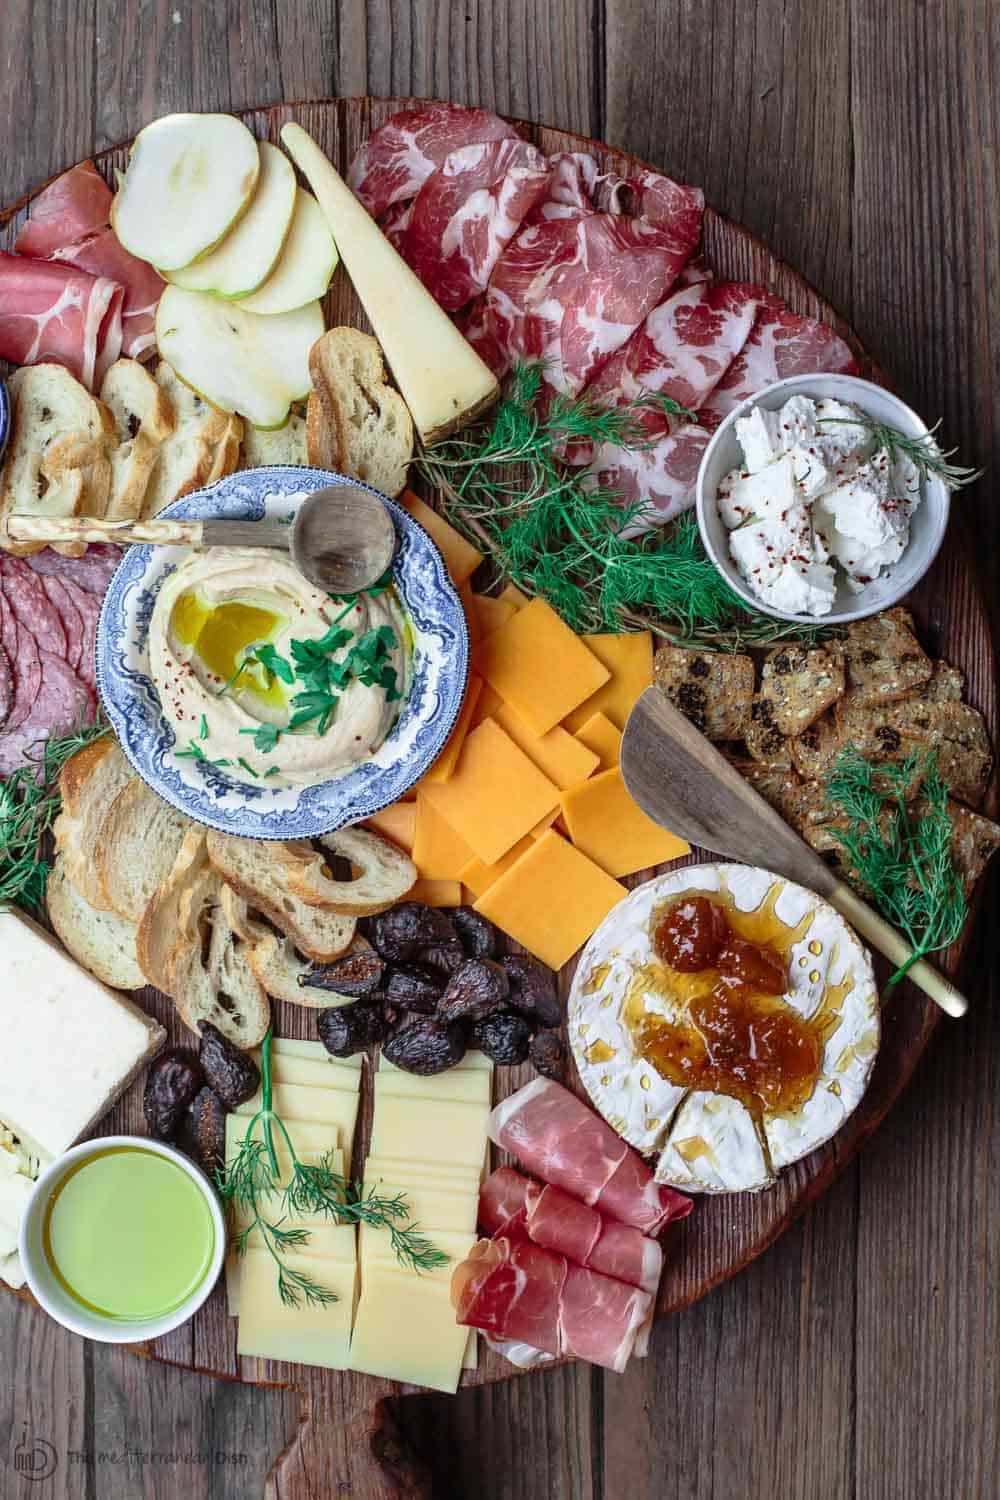 How to Build the Perfect Cheese Board